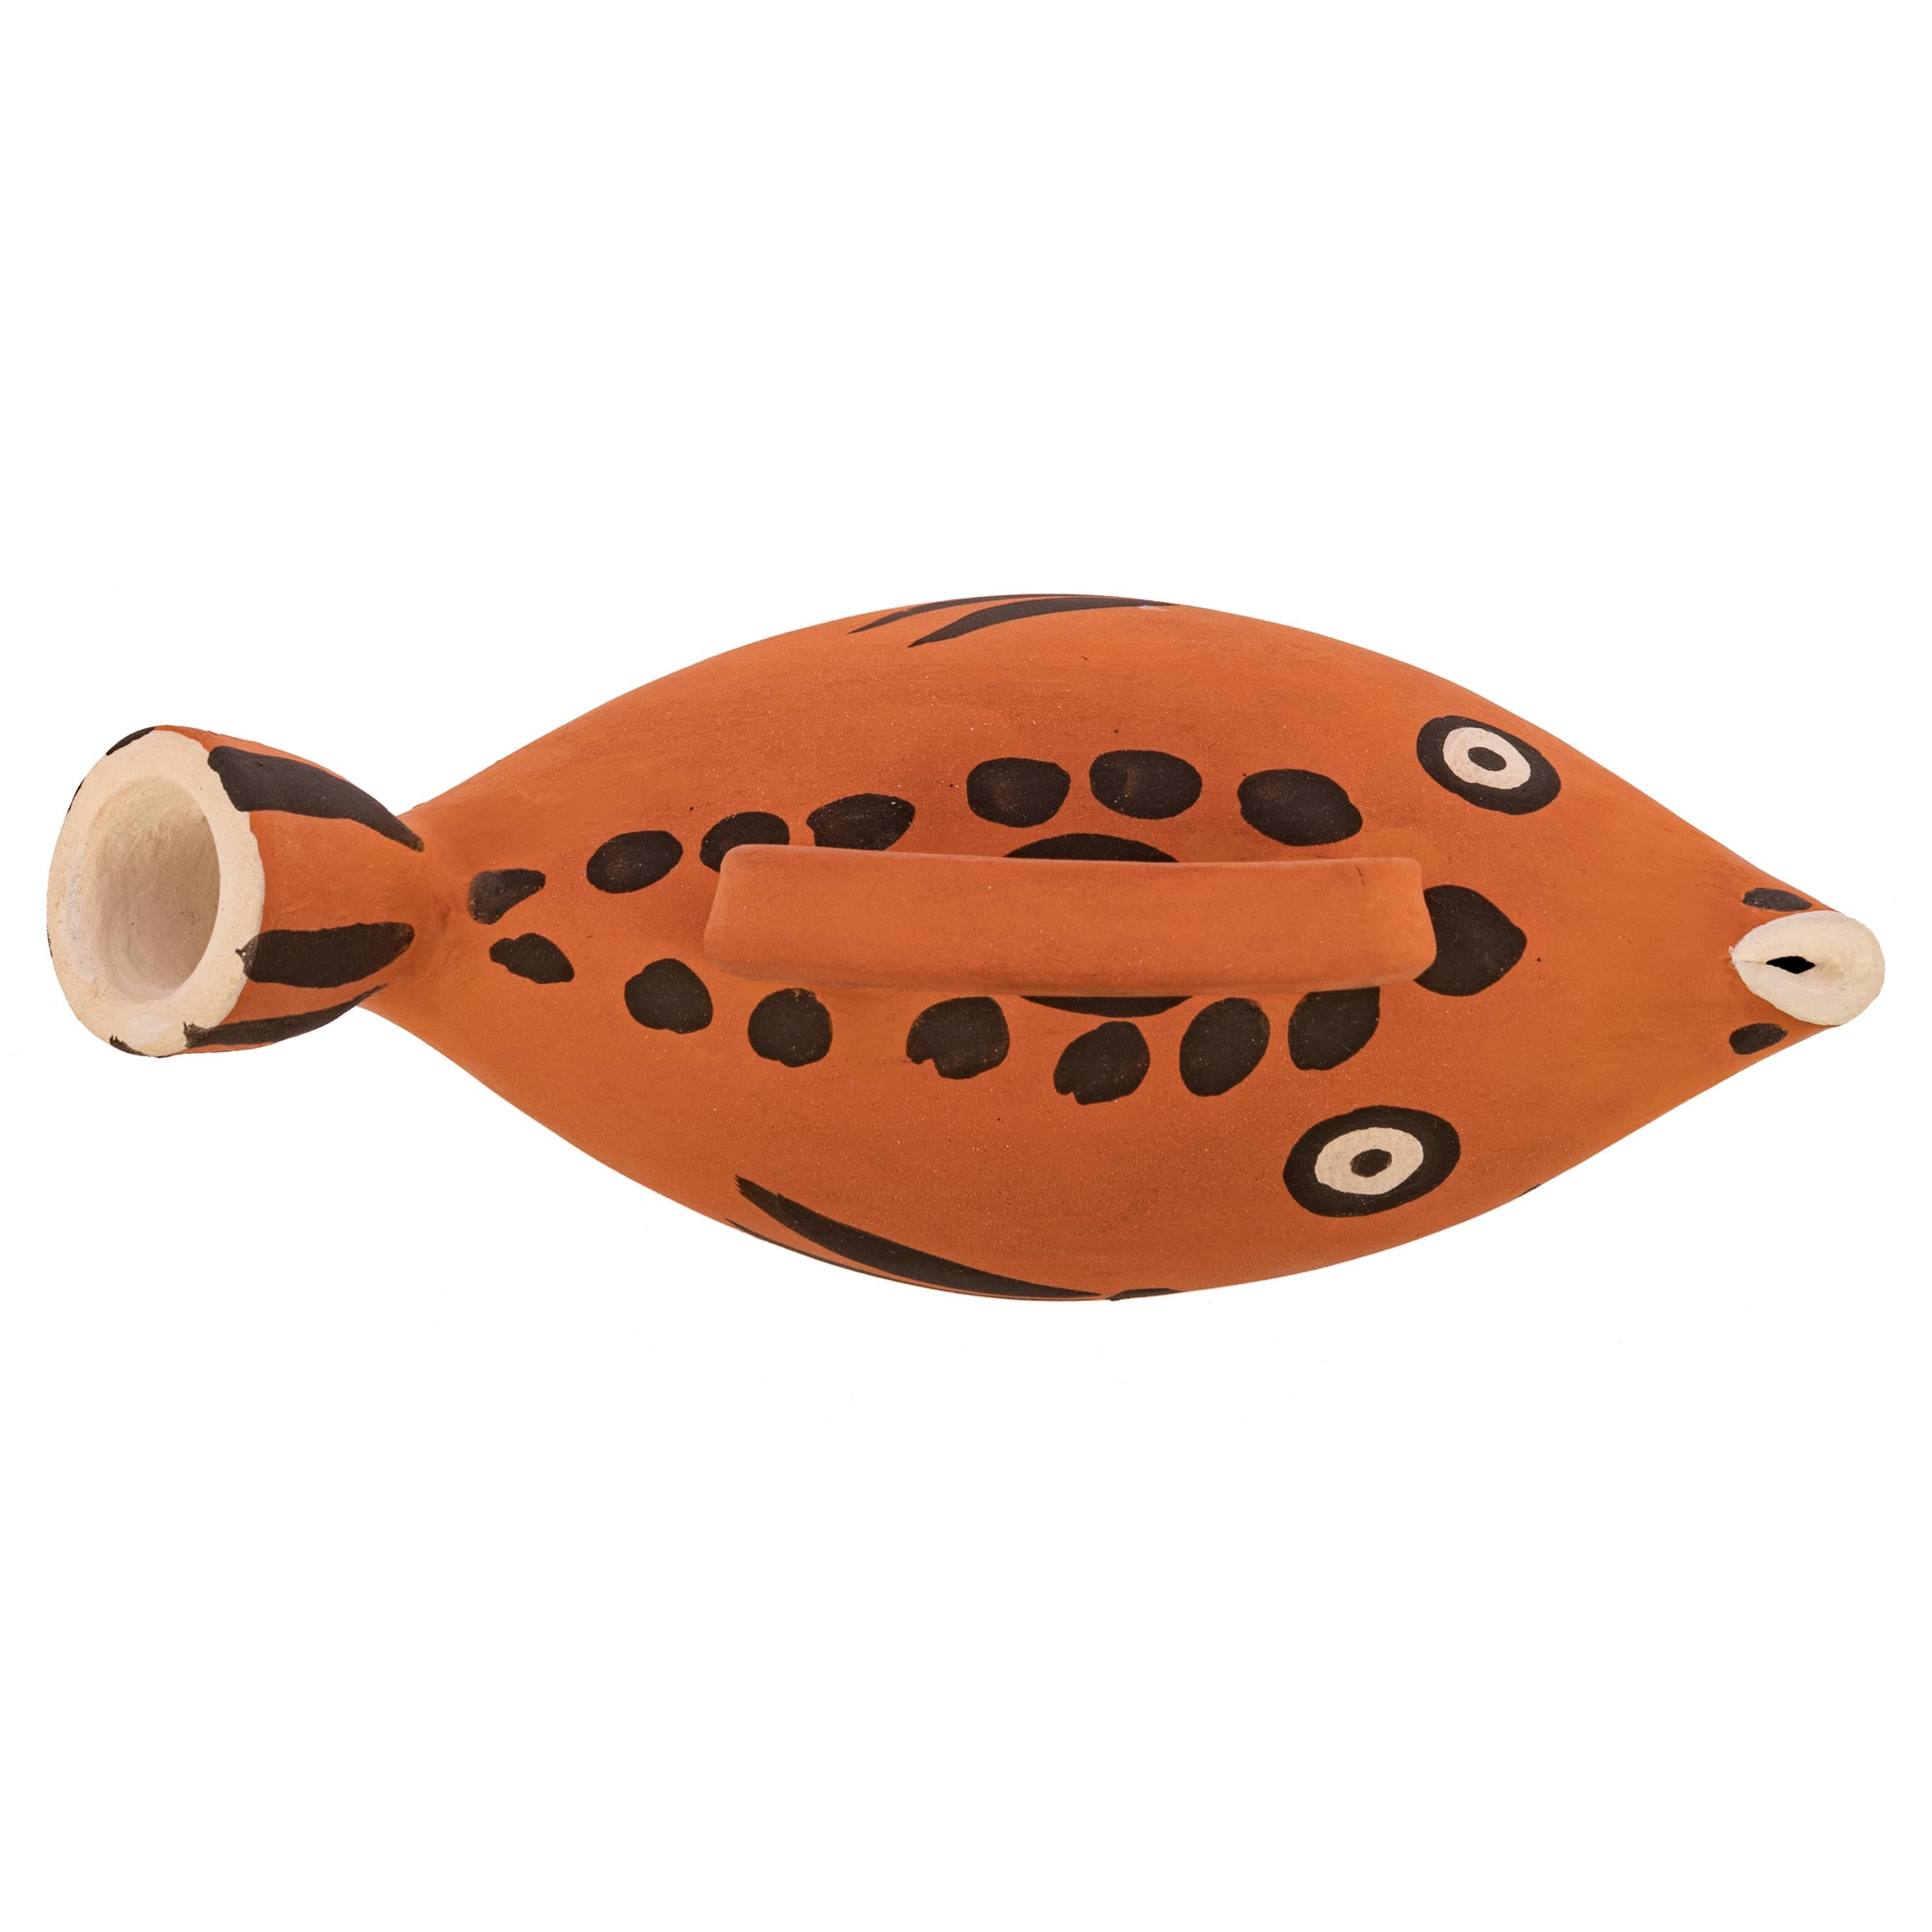 Pablo Picasso Terracotta Fish Pitcher Madoura Pottery Sujet Poisson France 1952  For Sale 3